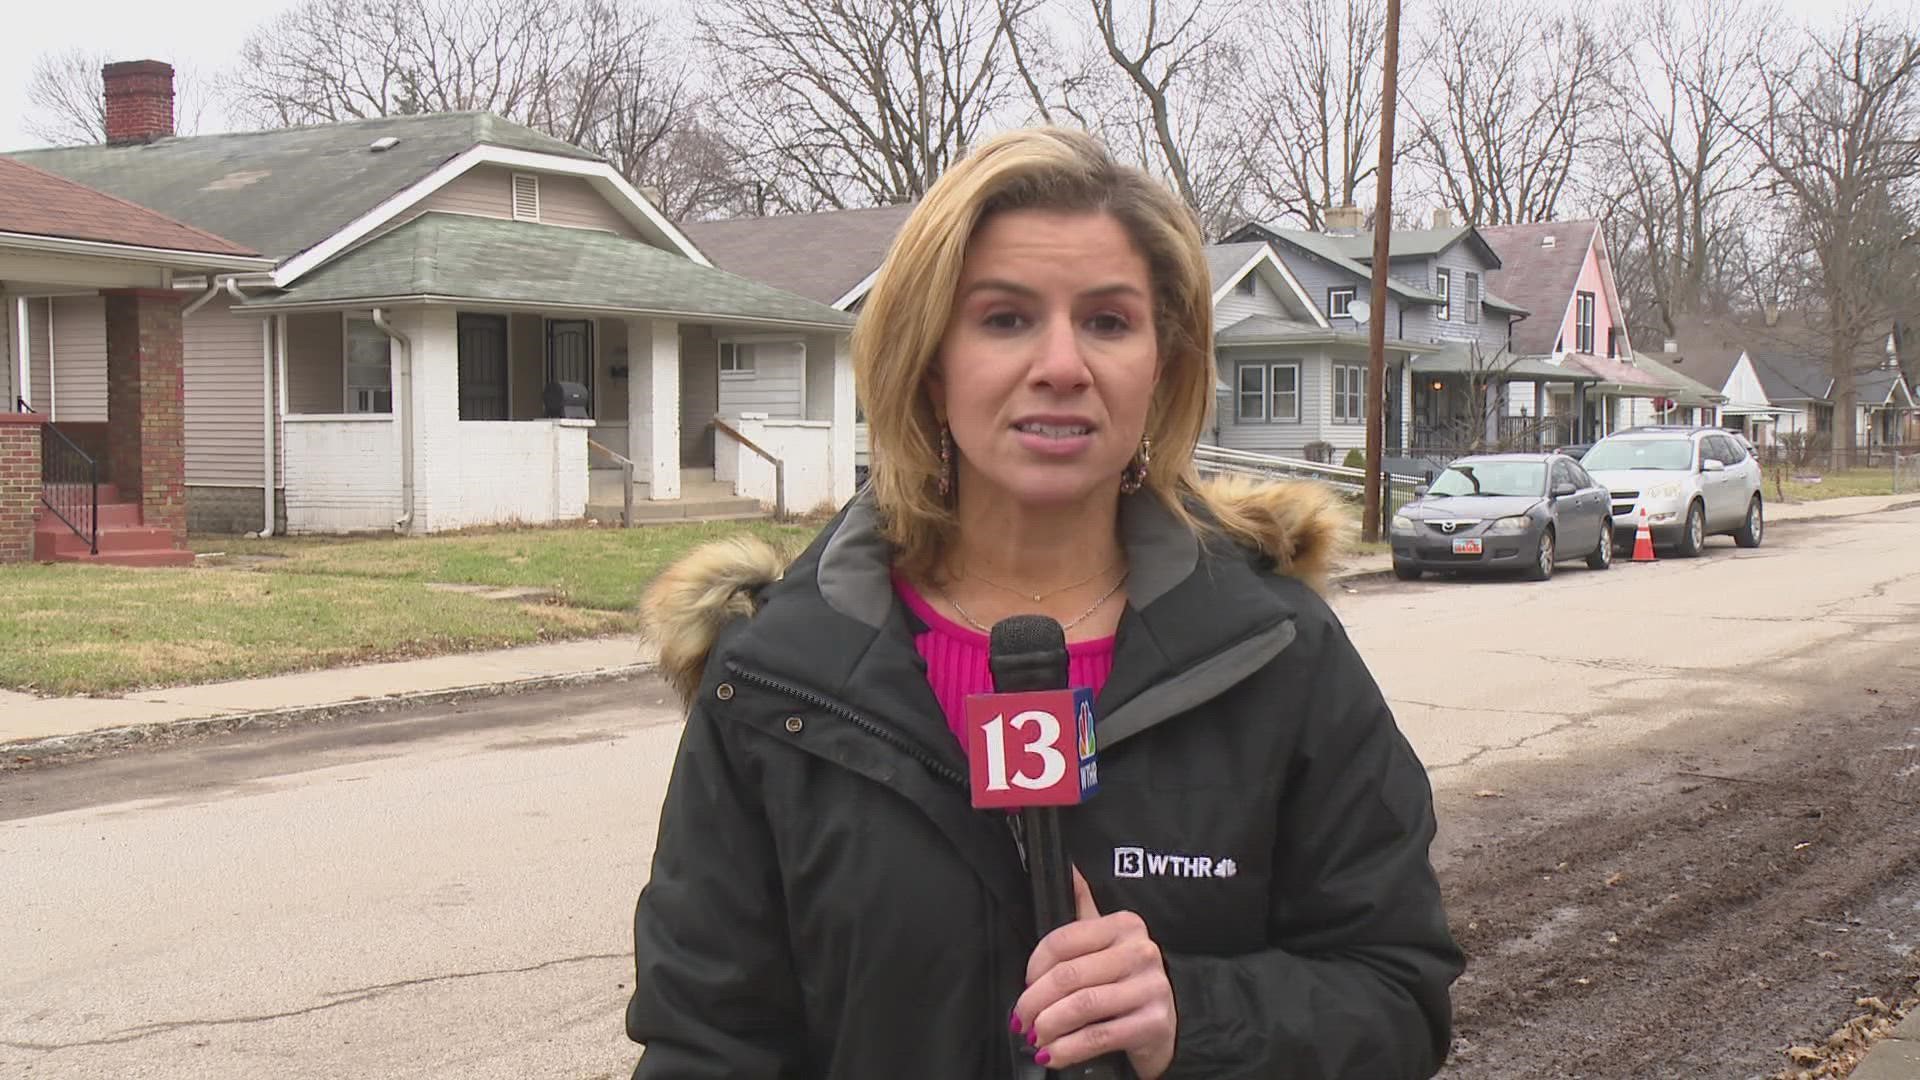 An Indianapolis mother is recovering after someone shot multiple rounds into her home on the near northwest side.